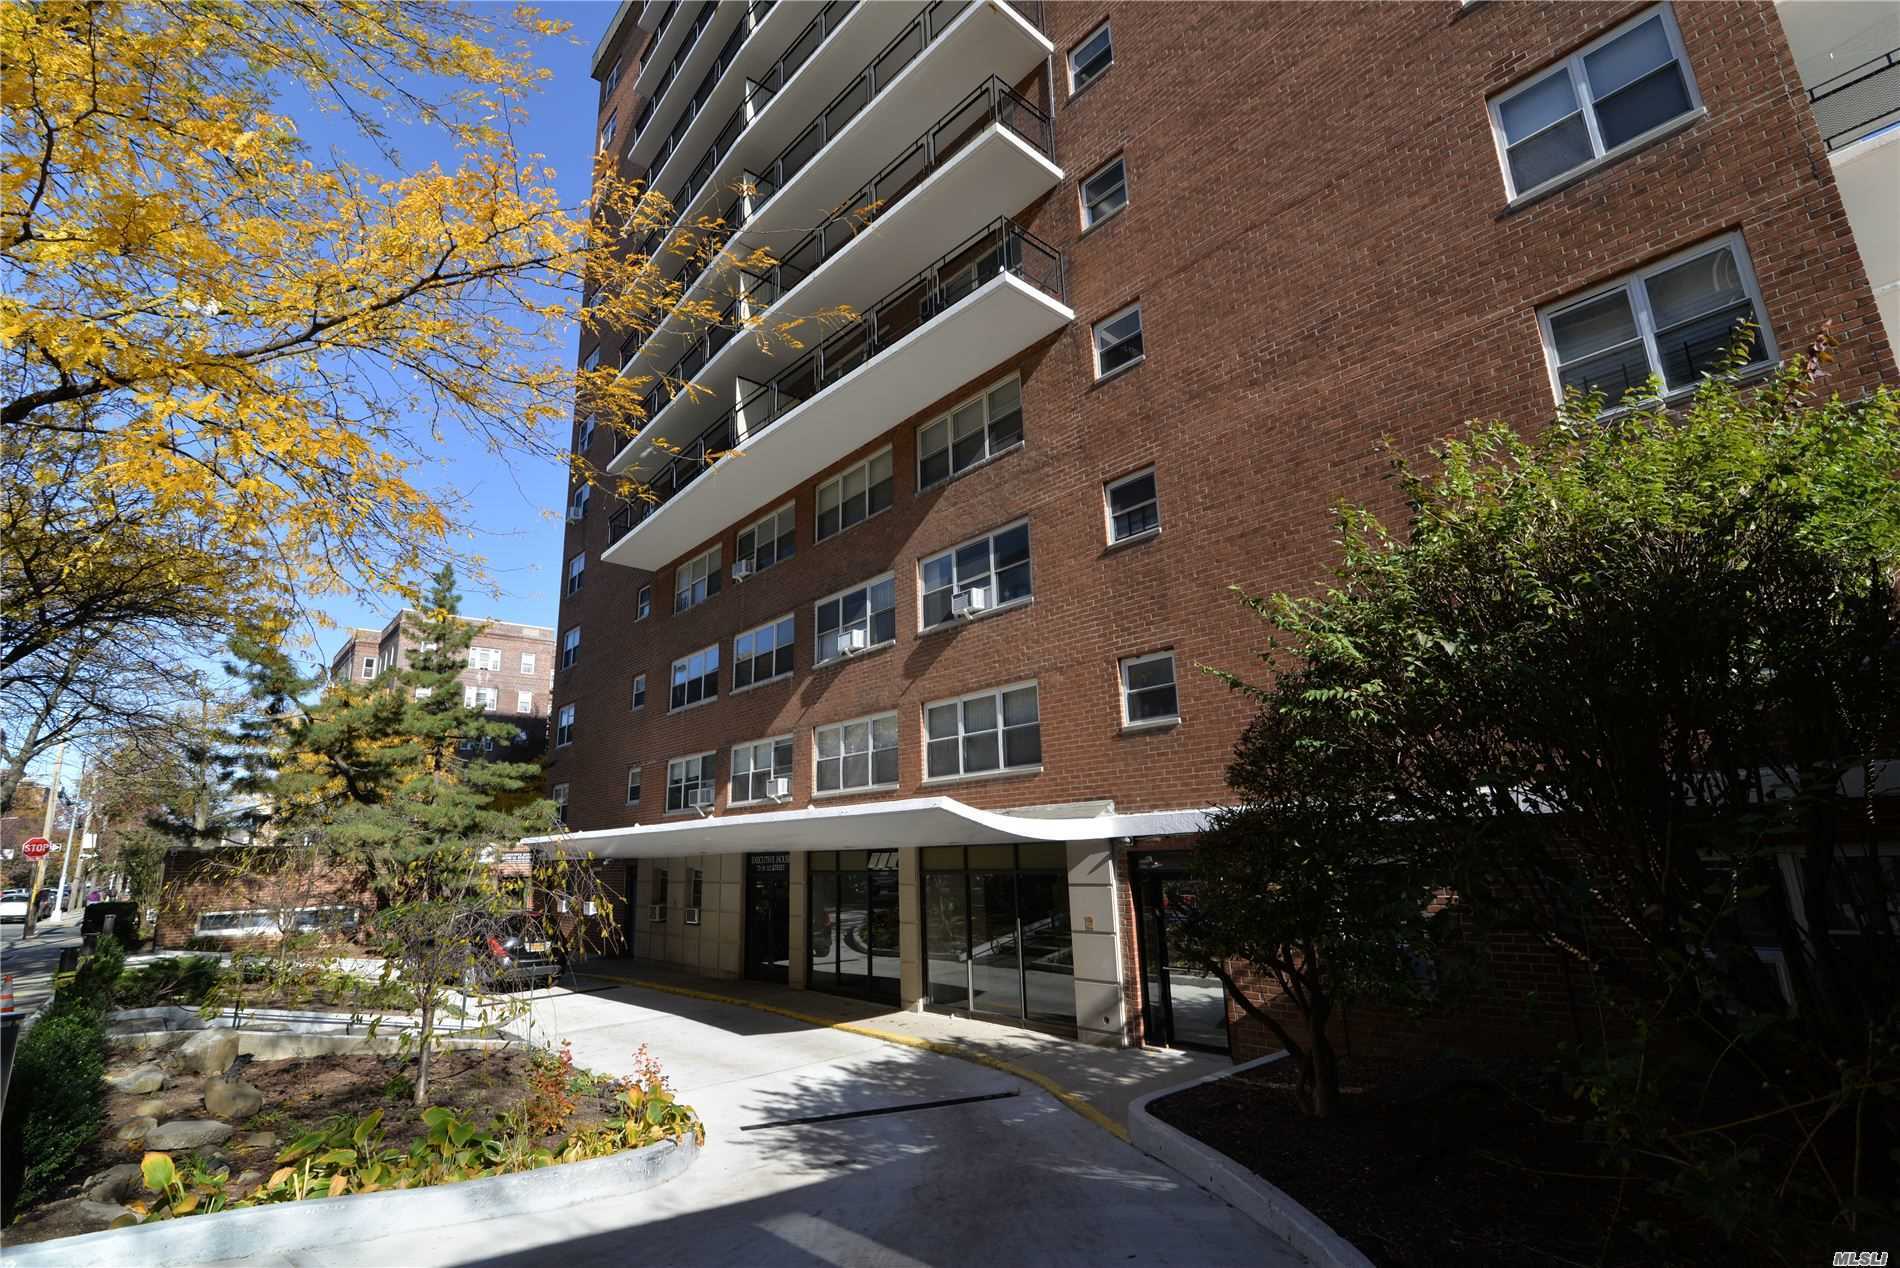 Breathtaking Views of The Manhattan Skyline, Part-time Doormen From Noon to Midnight. 0.4 Miles From E&F Express Train, Large Size of The Balcony, Prime 28 School District With PS 196 And JHS 157, Forest Hills Height School. Pet Friendly